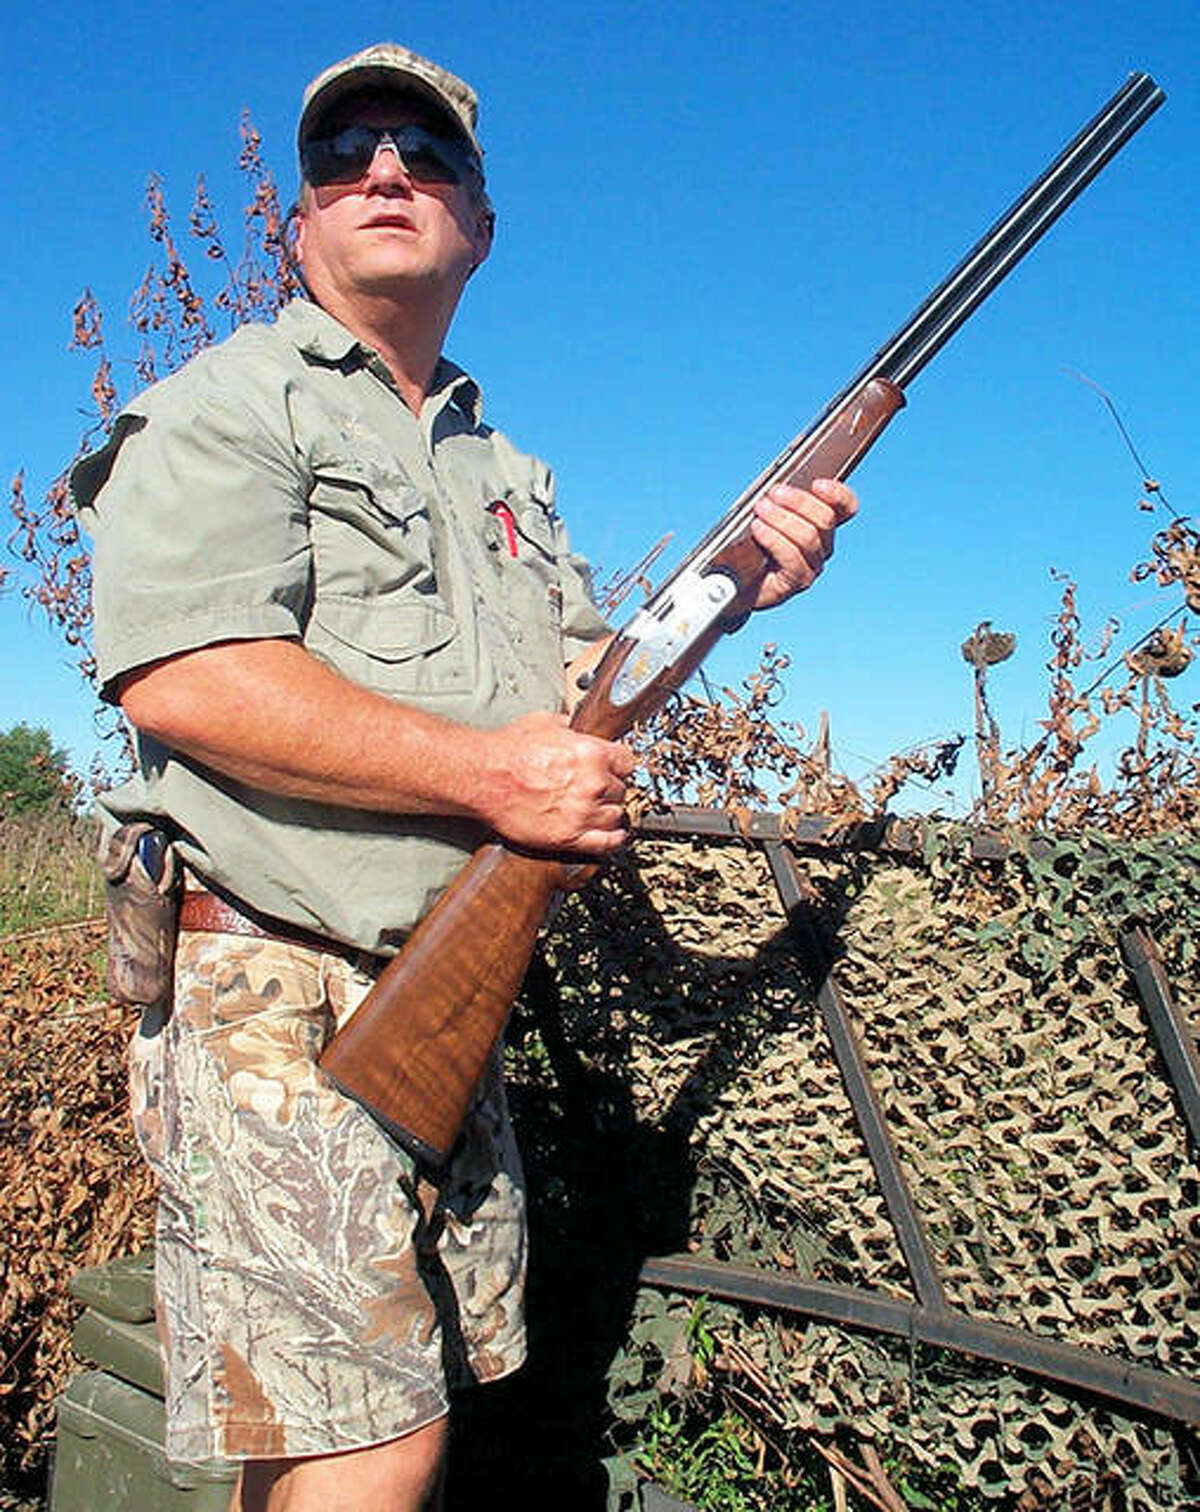 The tradition continues as lively as ever as local hunters set their sights on our fast flying doves. This year again features a recently expanded 90-day season.